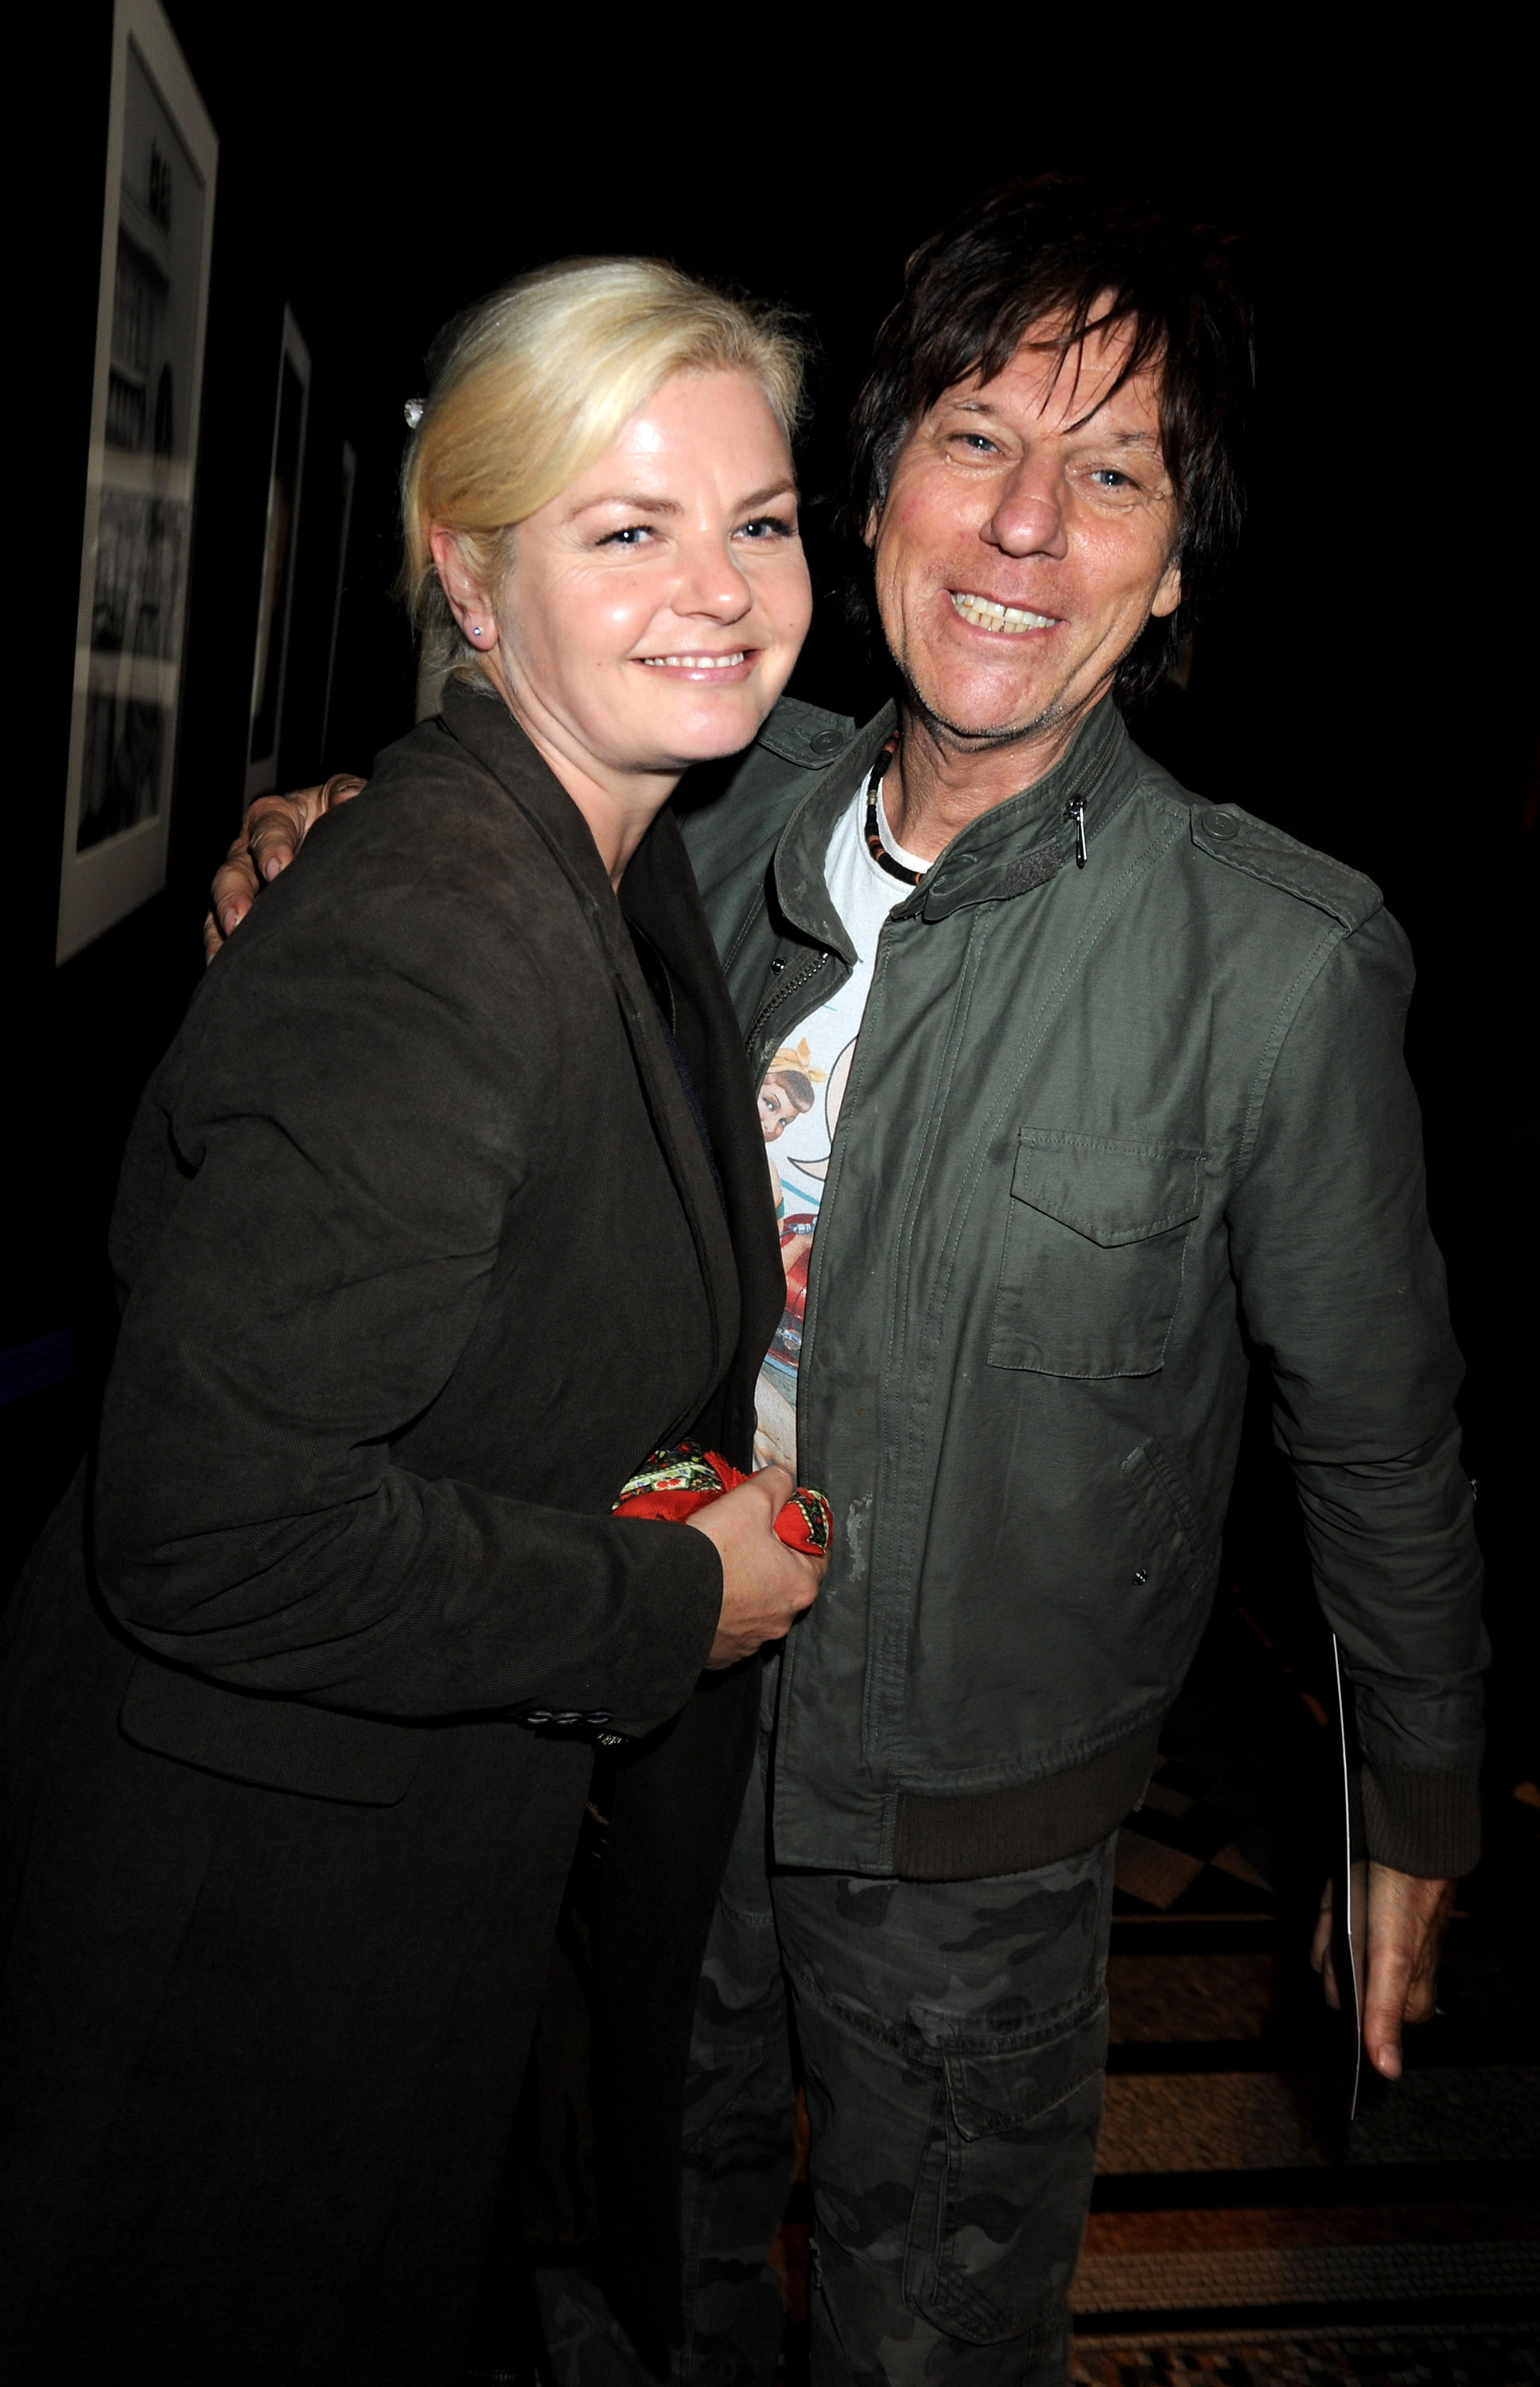 Sandra Cash and Jeff Beck at the 30 Days of Fashion and Beauty Gala on September 16, 2008, in London, England. | Source: Getty Images